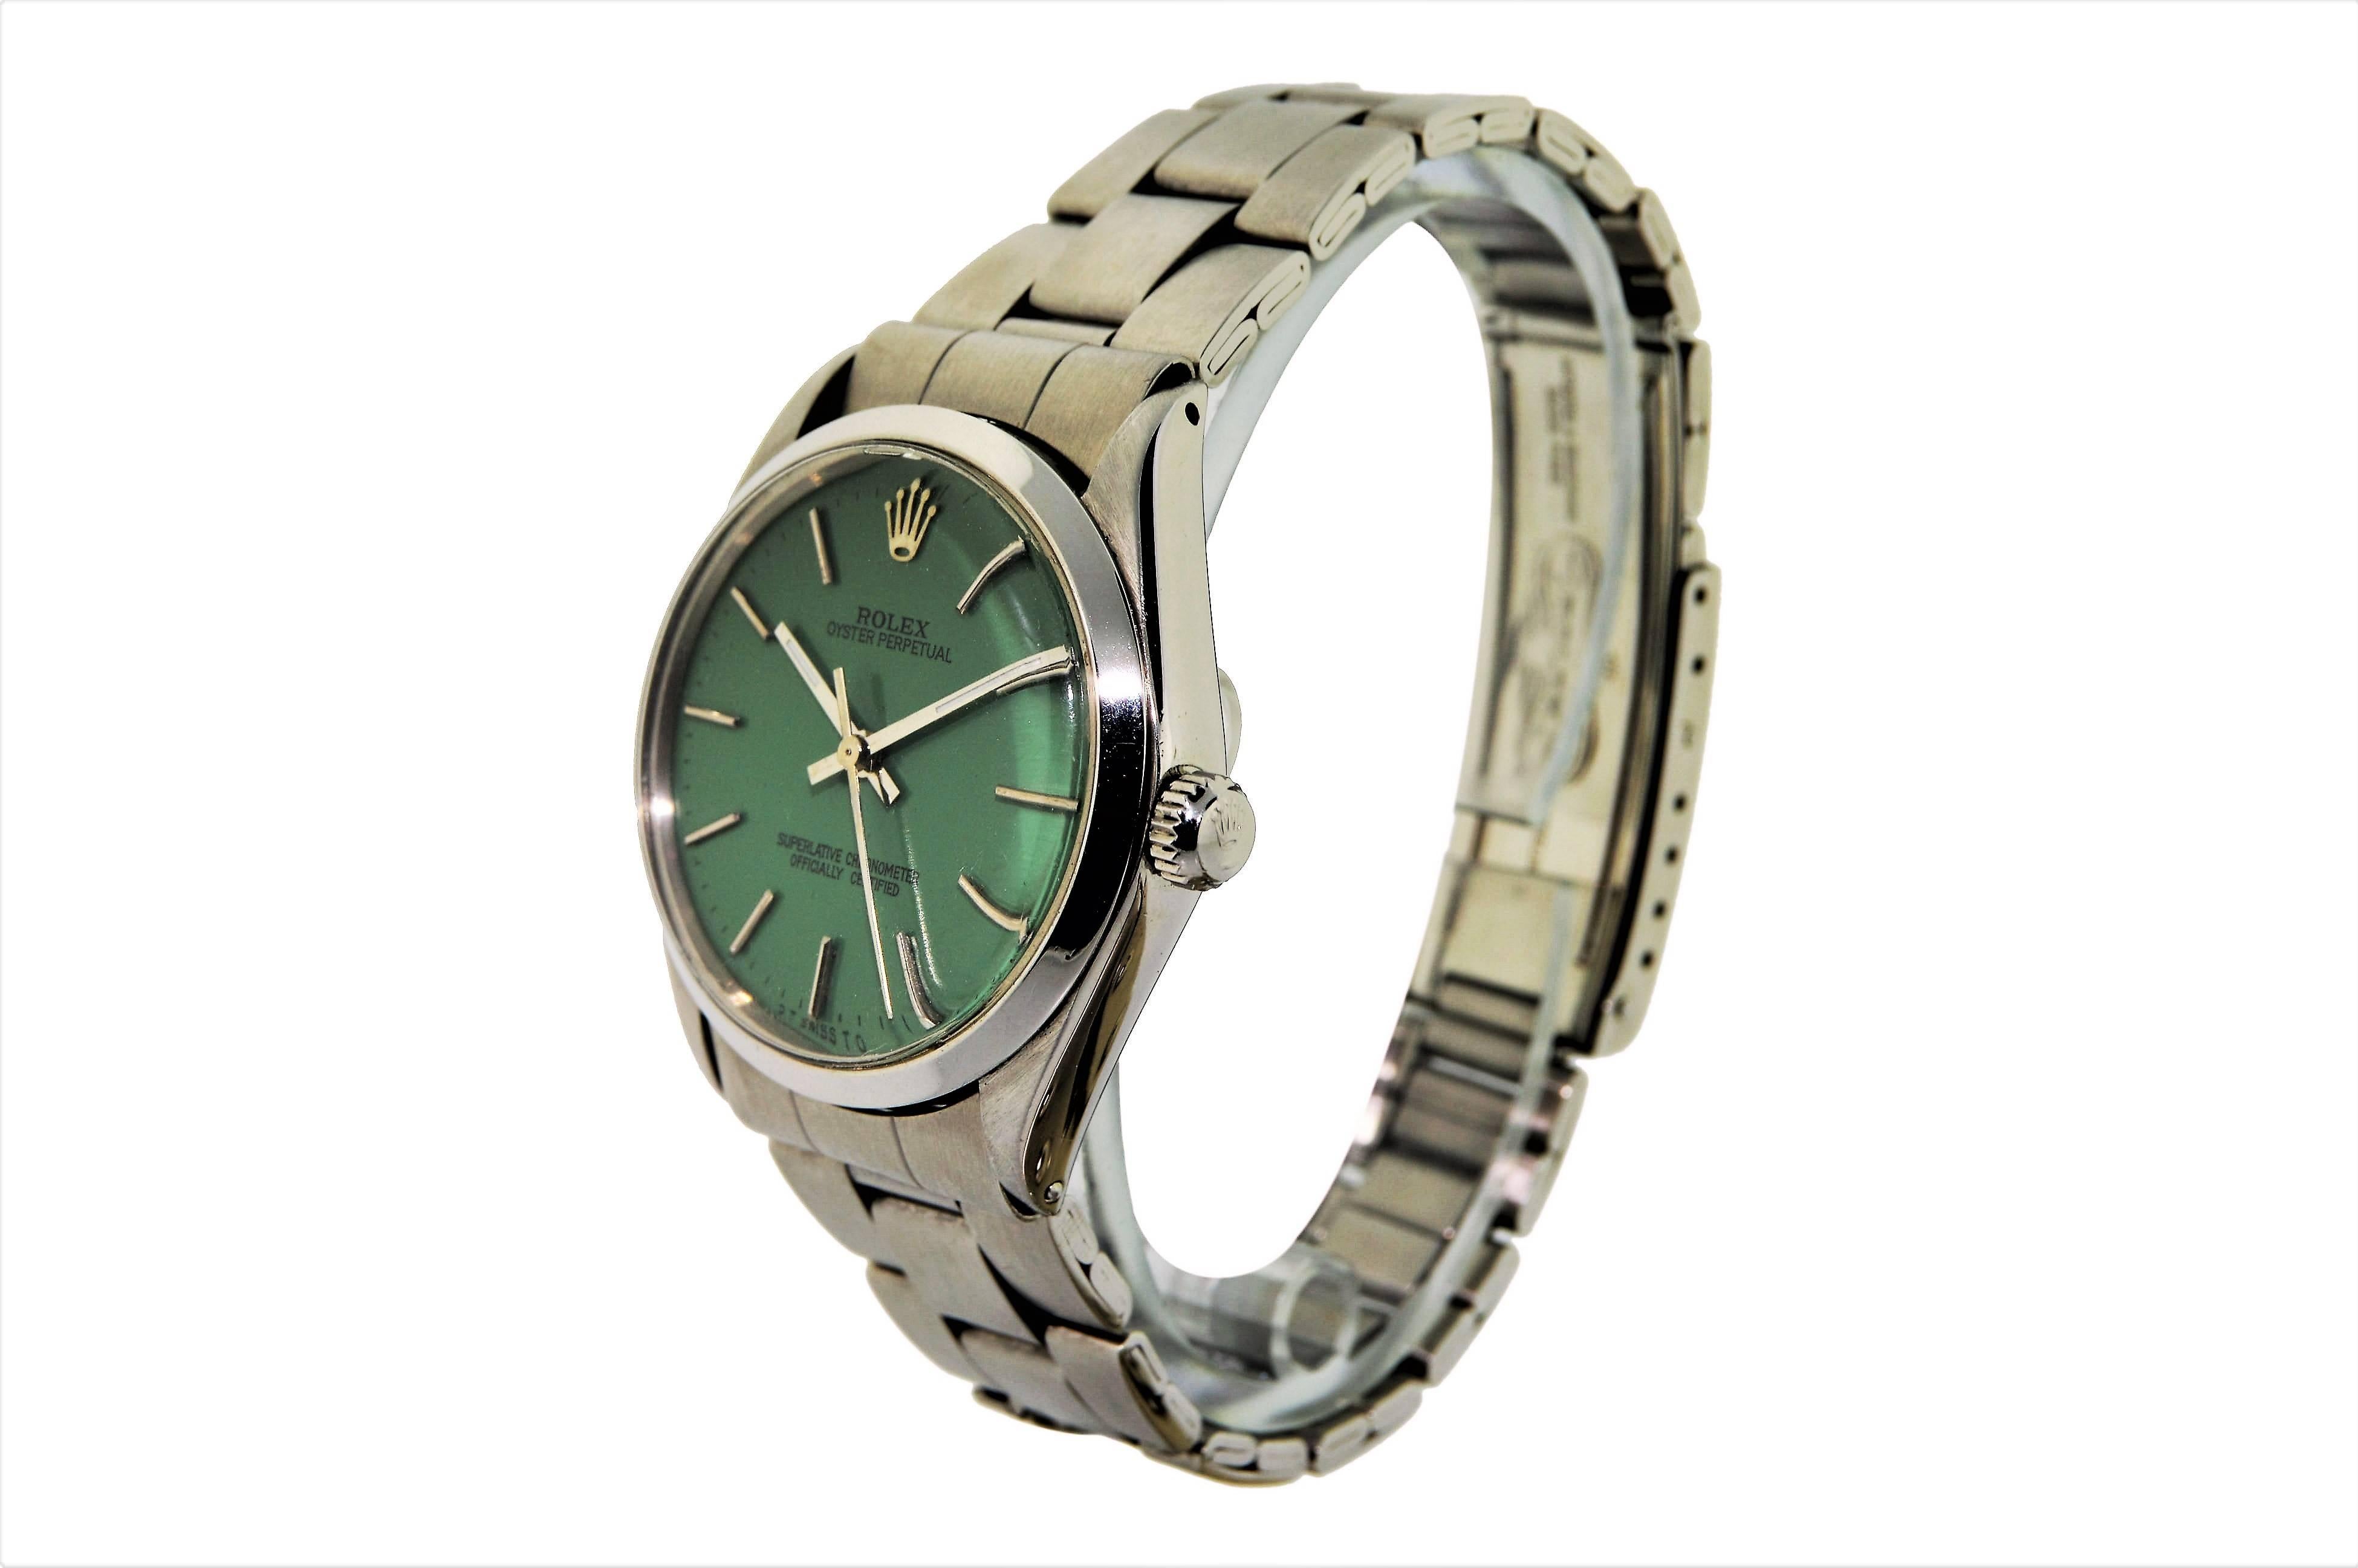 FACTORY / HOUSE: Rolex Watch Company
STYLE / REFERENCE: Oyster Perpetual / Reference 1002 / 1003
METAL: Stainless Steel 
CIRCA: 1970's
MOVEMENT / CALIBER: Perpetual Winding / 26 Jewels / Caliber 1500's
DIAL / HANDS: Original Dial with custom Green